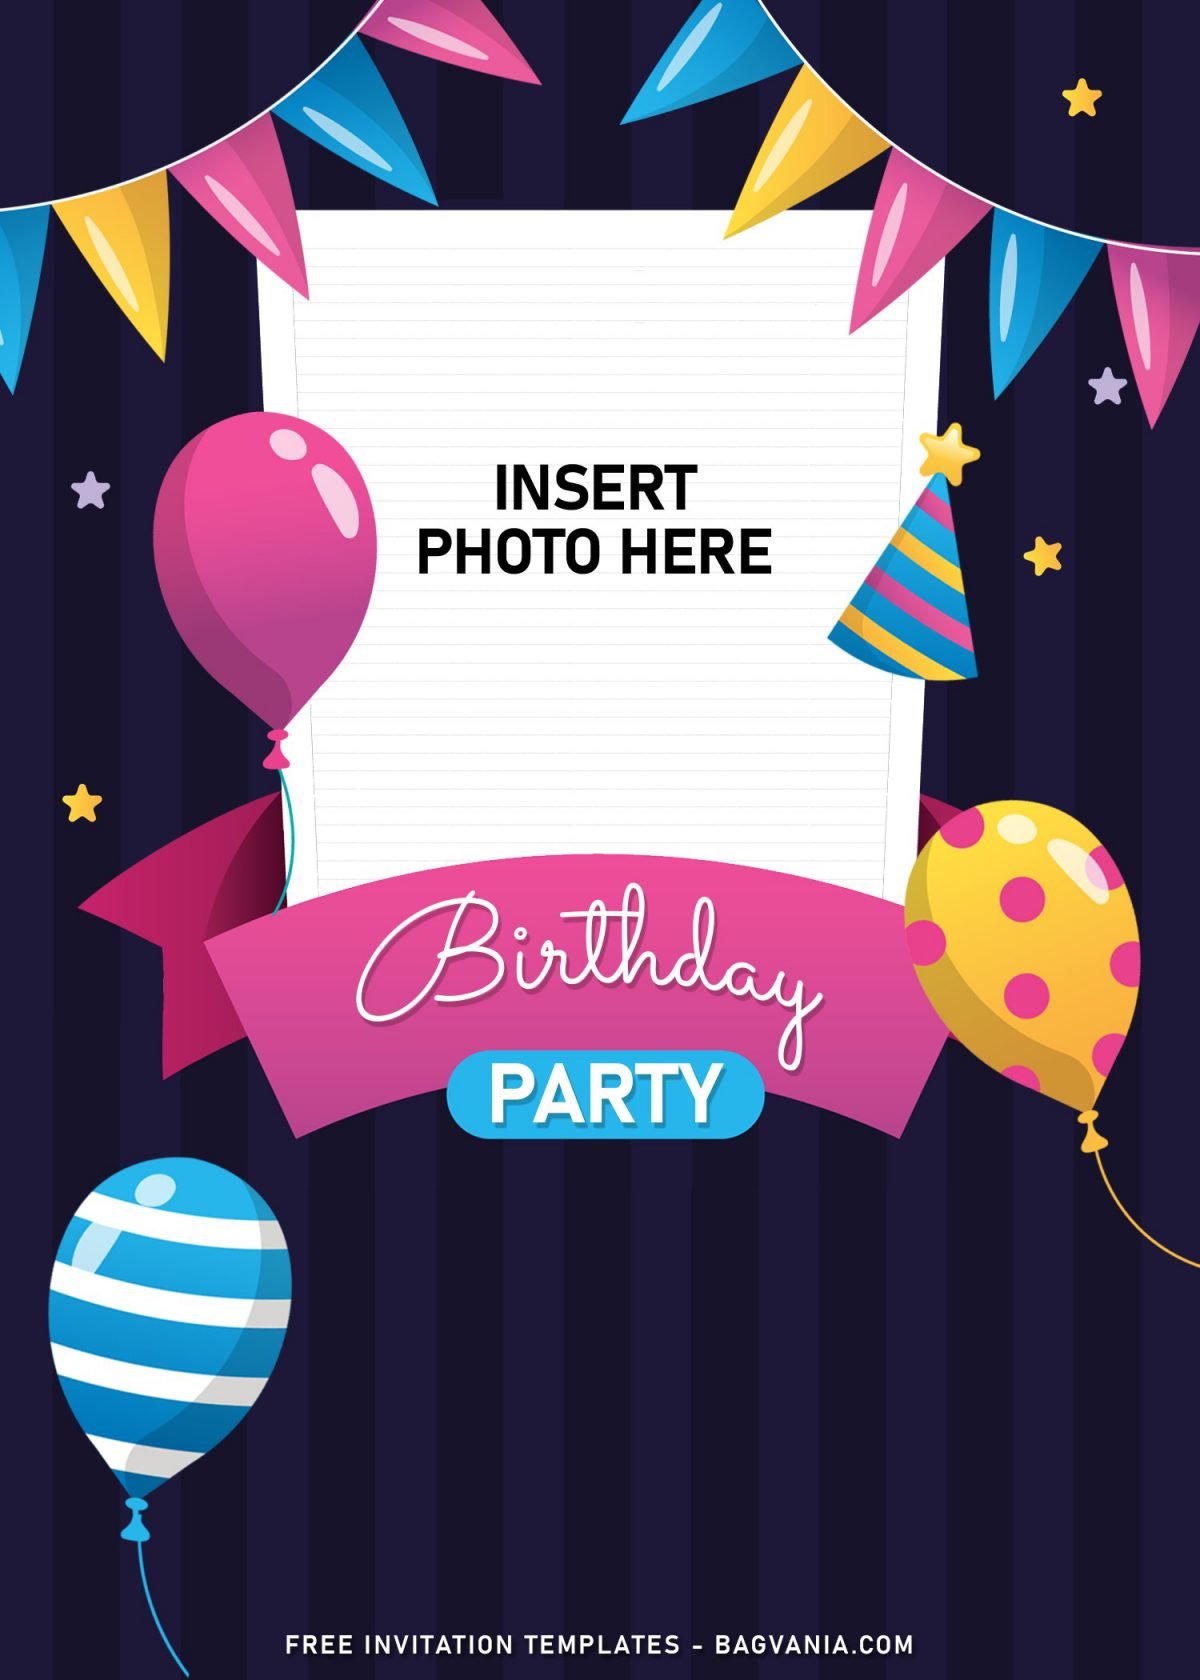 11+ Fun Birthday Invitation Templates For Your Kid’s Upcoming Birthday Party and has adorable pink balloon